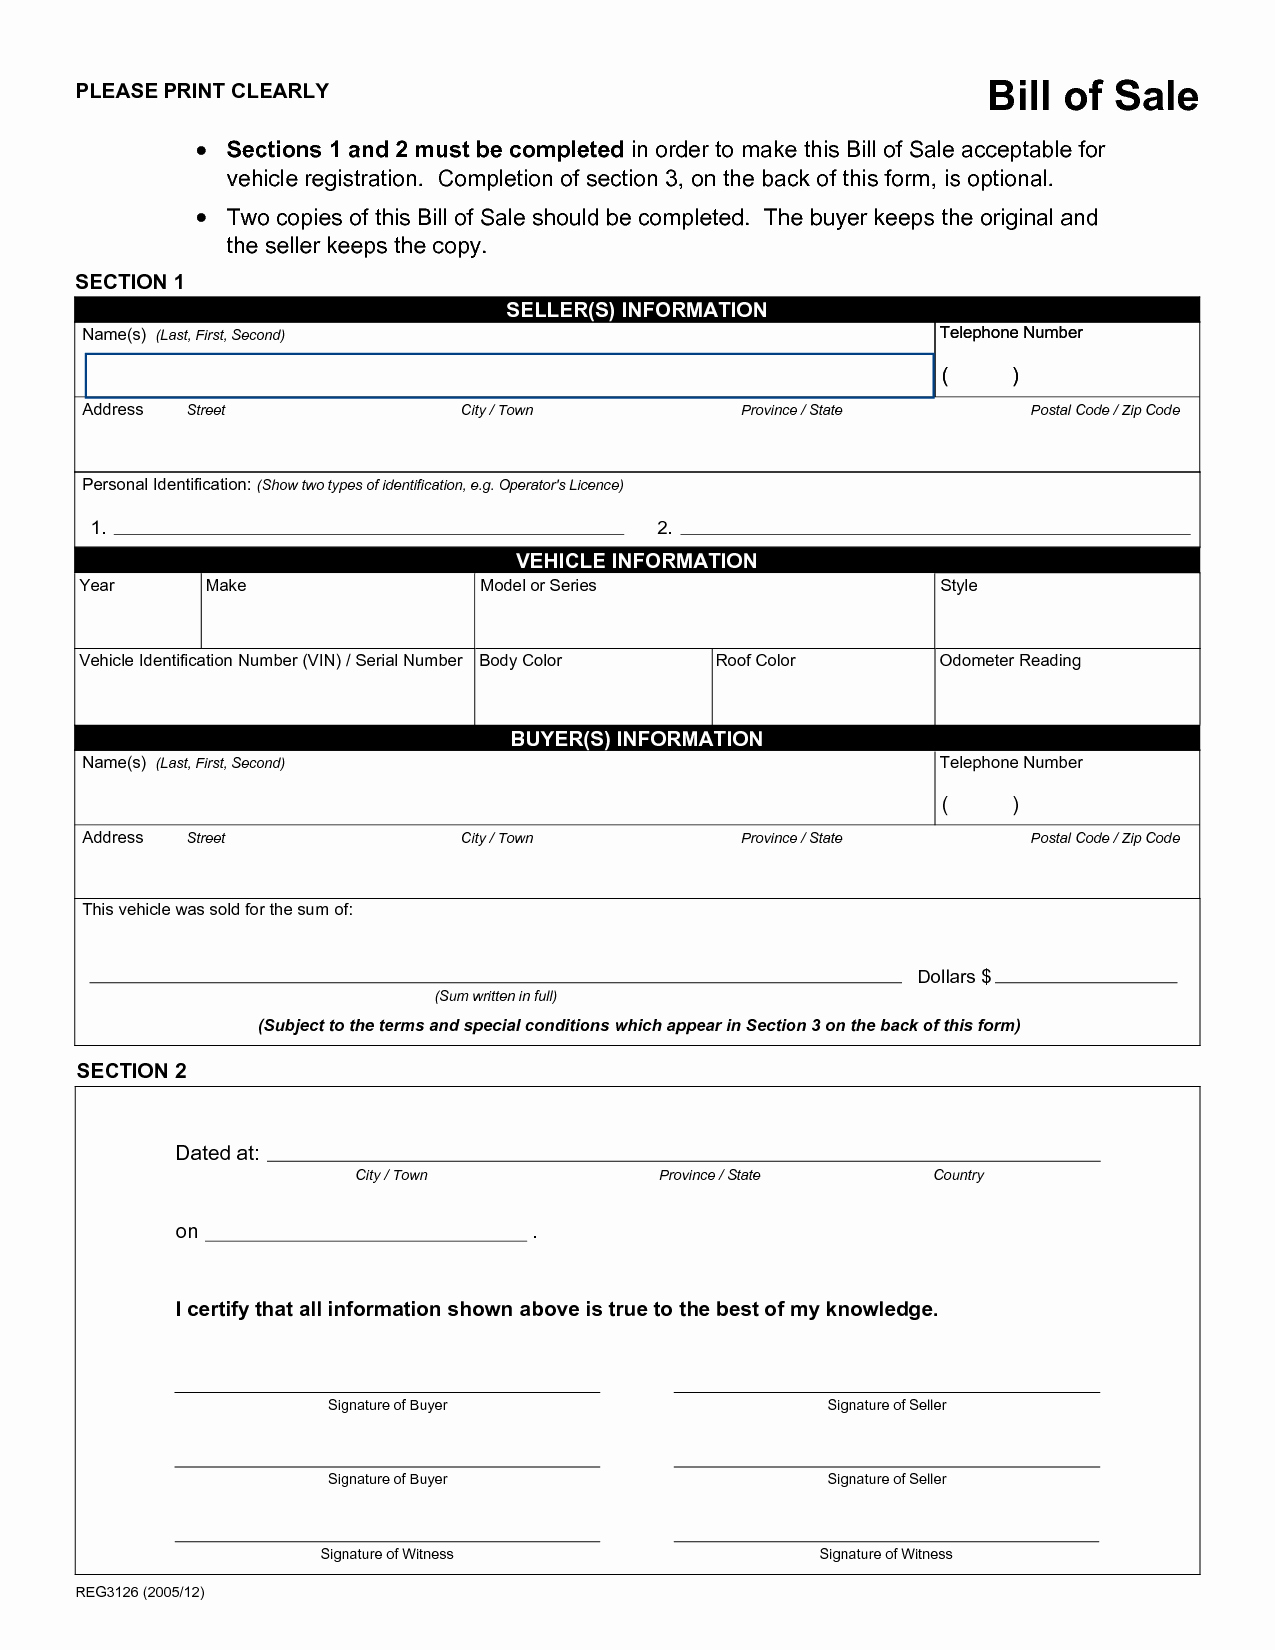 Bill Of Sales for Cars Lovely Free Printable Auto Bill Of Sale form Generic